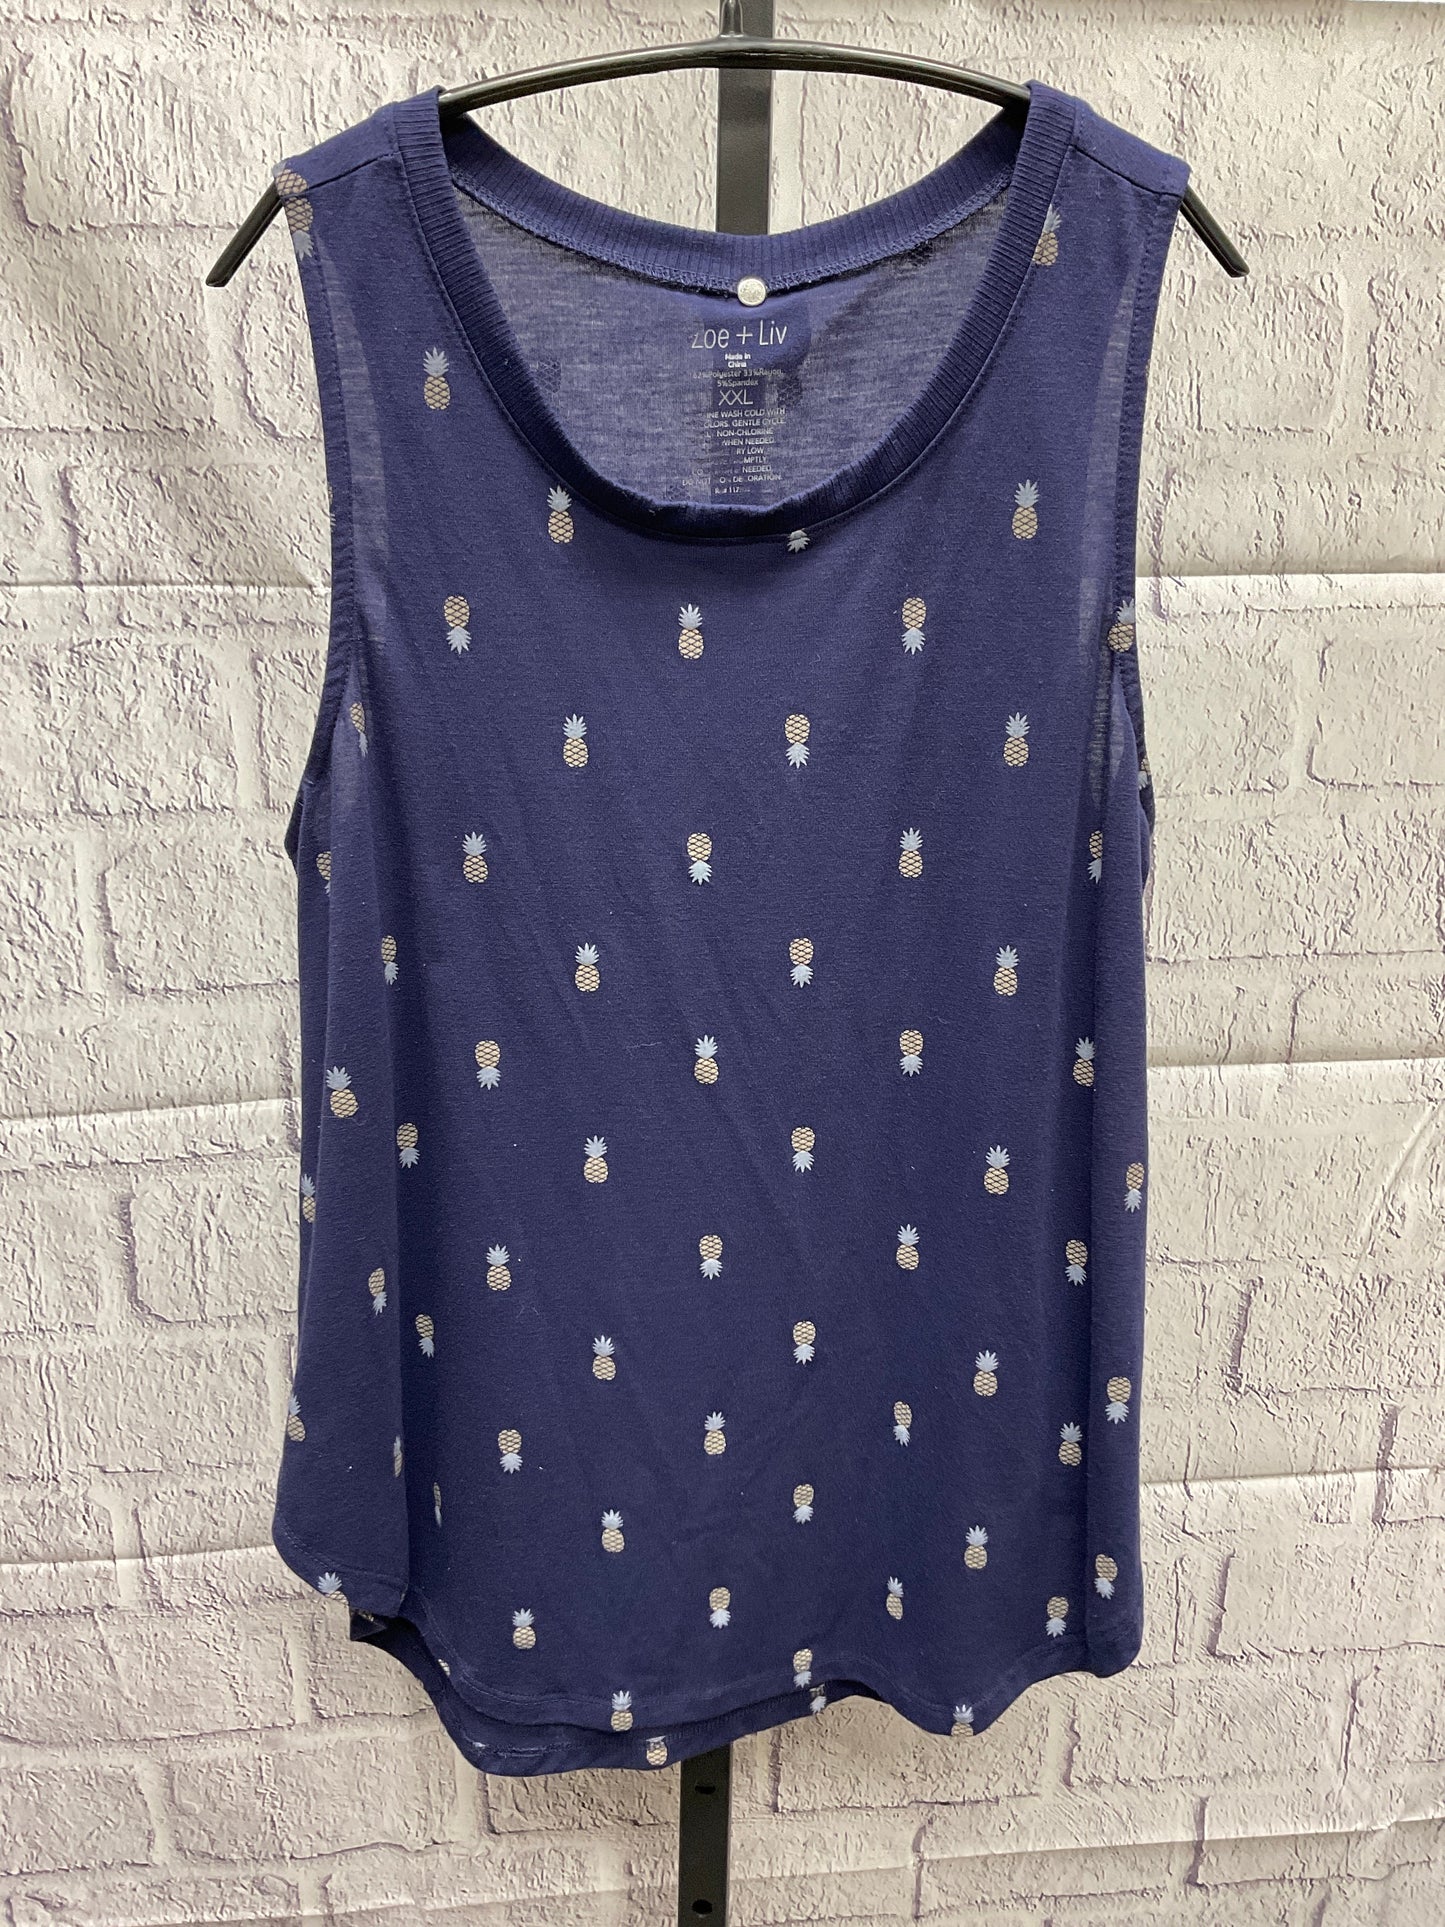 Top Sleeveless By Zoe And Liv  Size: Xxl